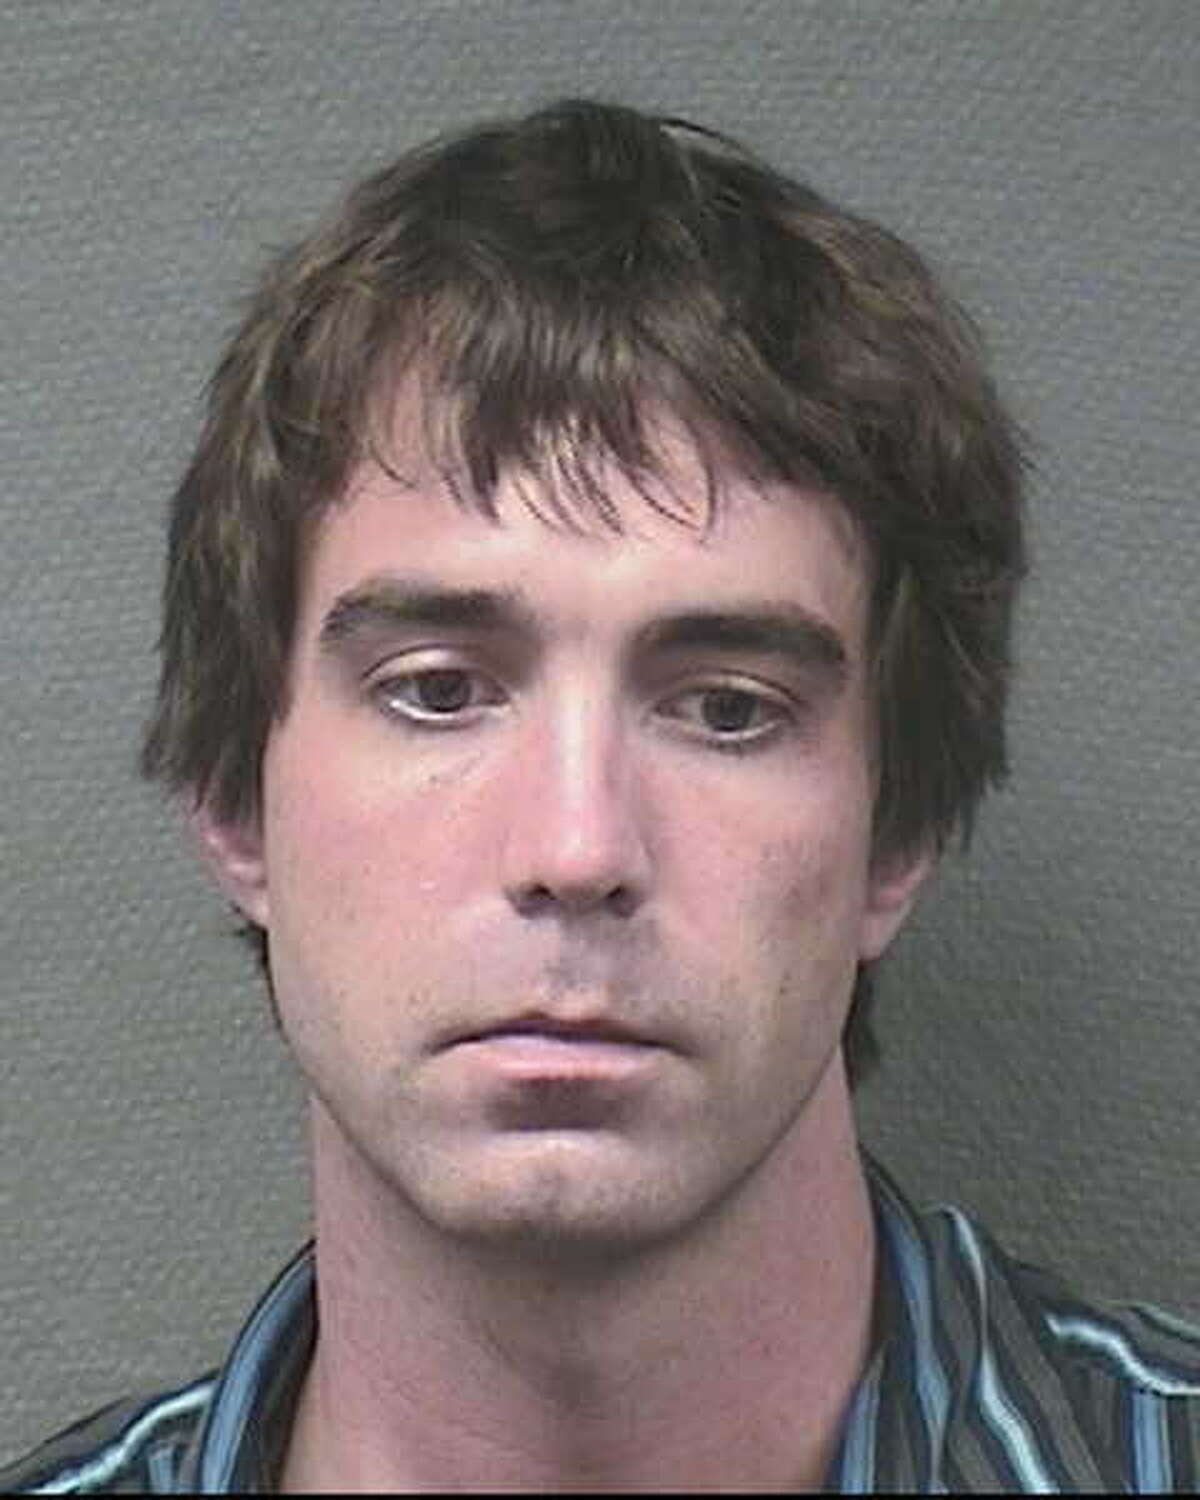 Uploading sex video on YouTube leads to Houston mans arrest pic